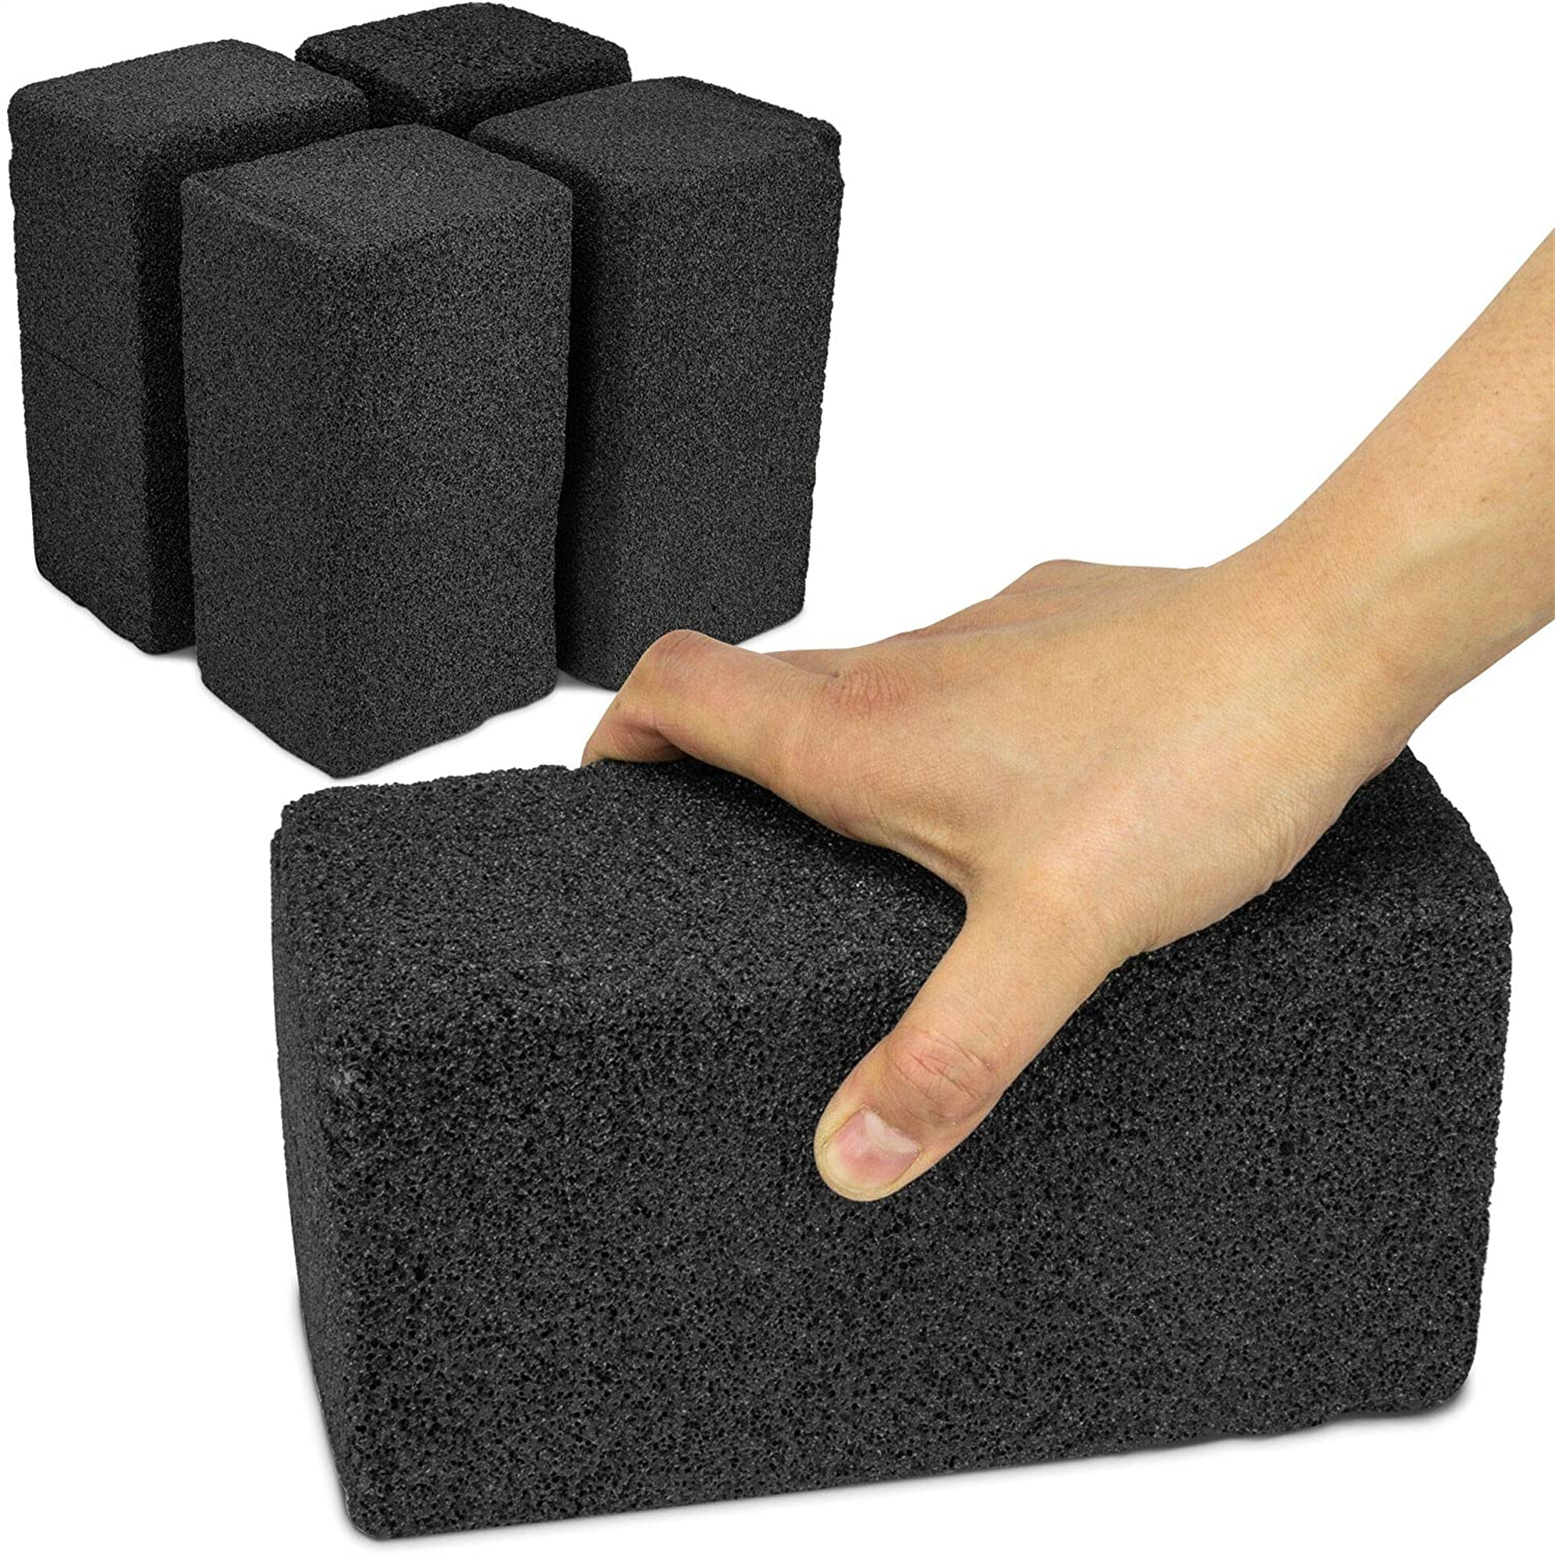 Grill Brick – Grill Pumice Stone 8″ x 4″ x 3.5″ Commercial Grill Cleaning and Maintenance